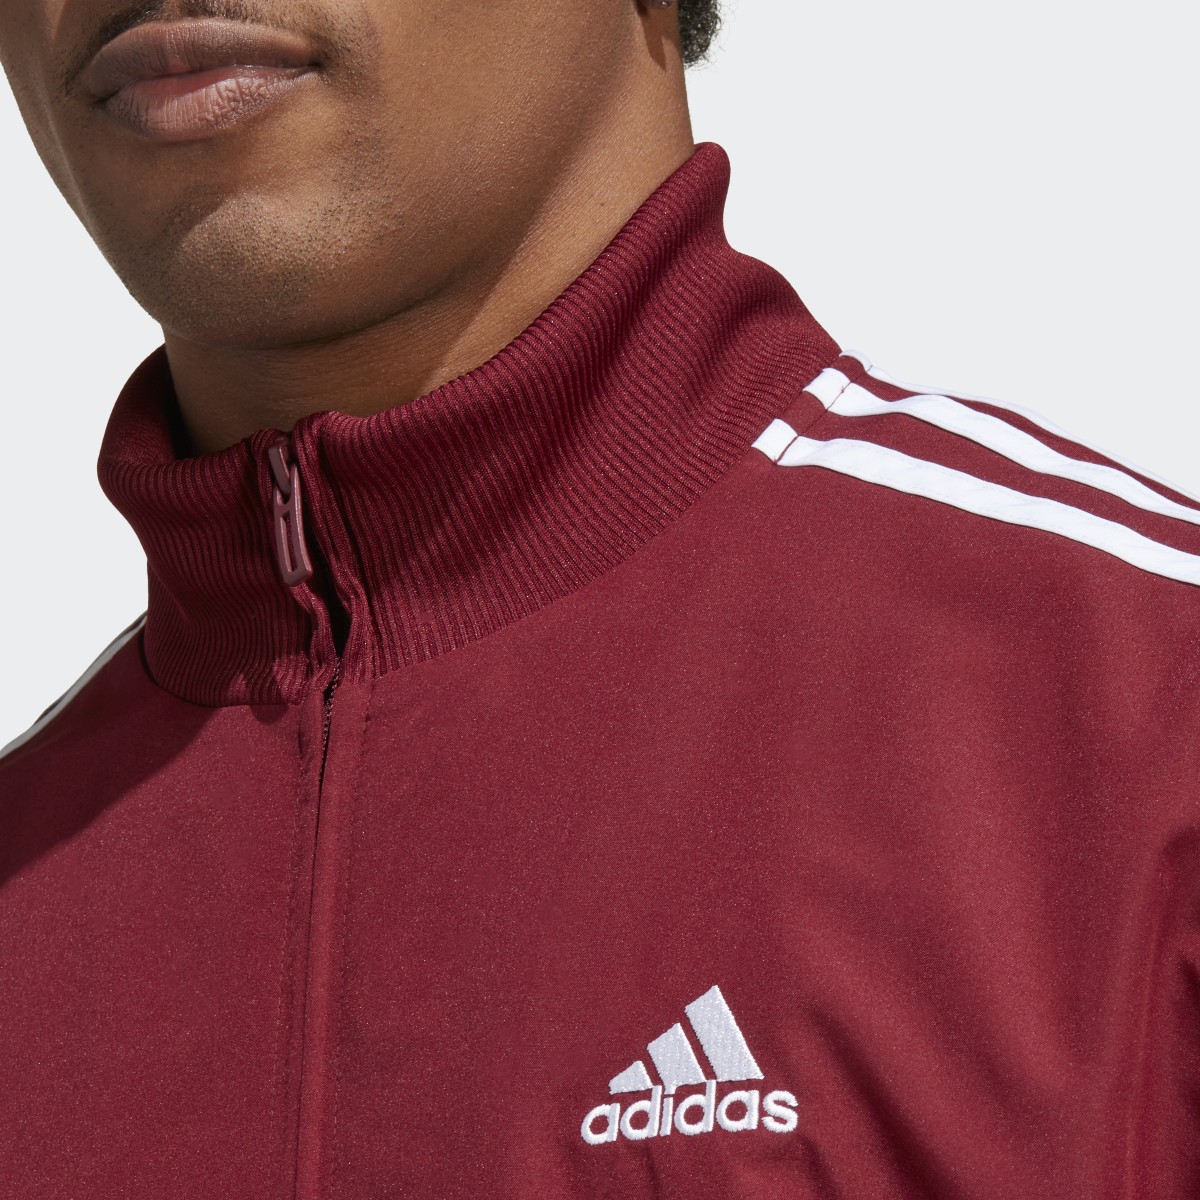 Adidas 3-Stripes Woven Tracksuit. 8